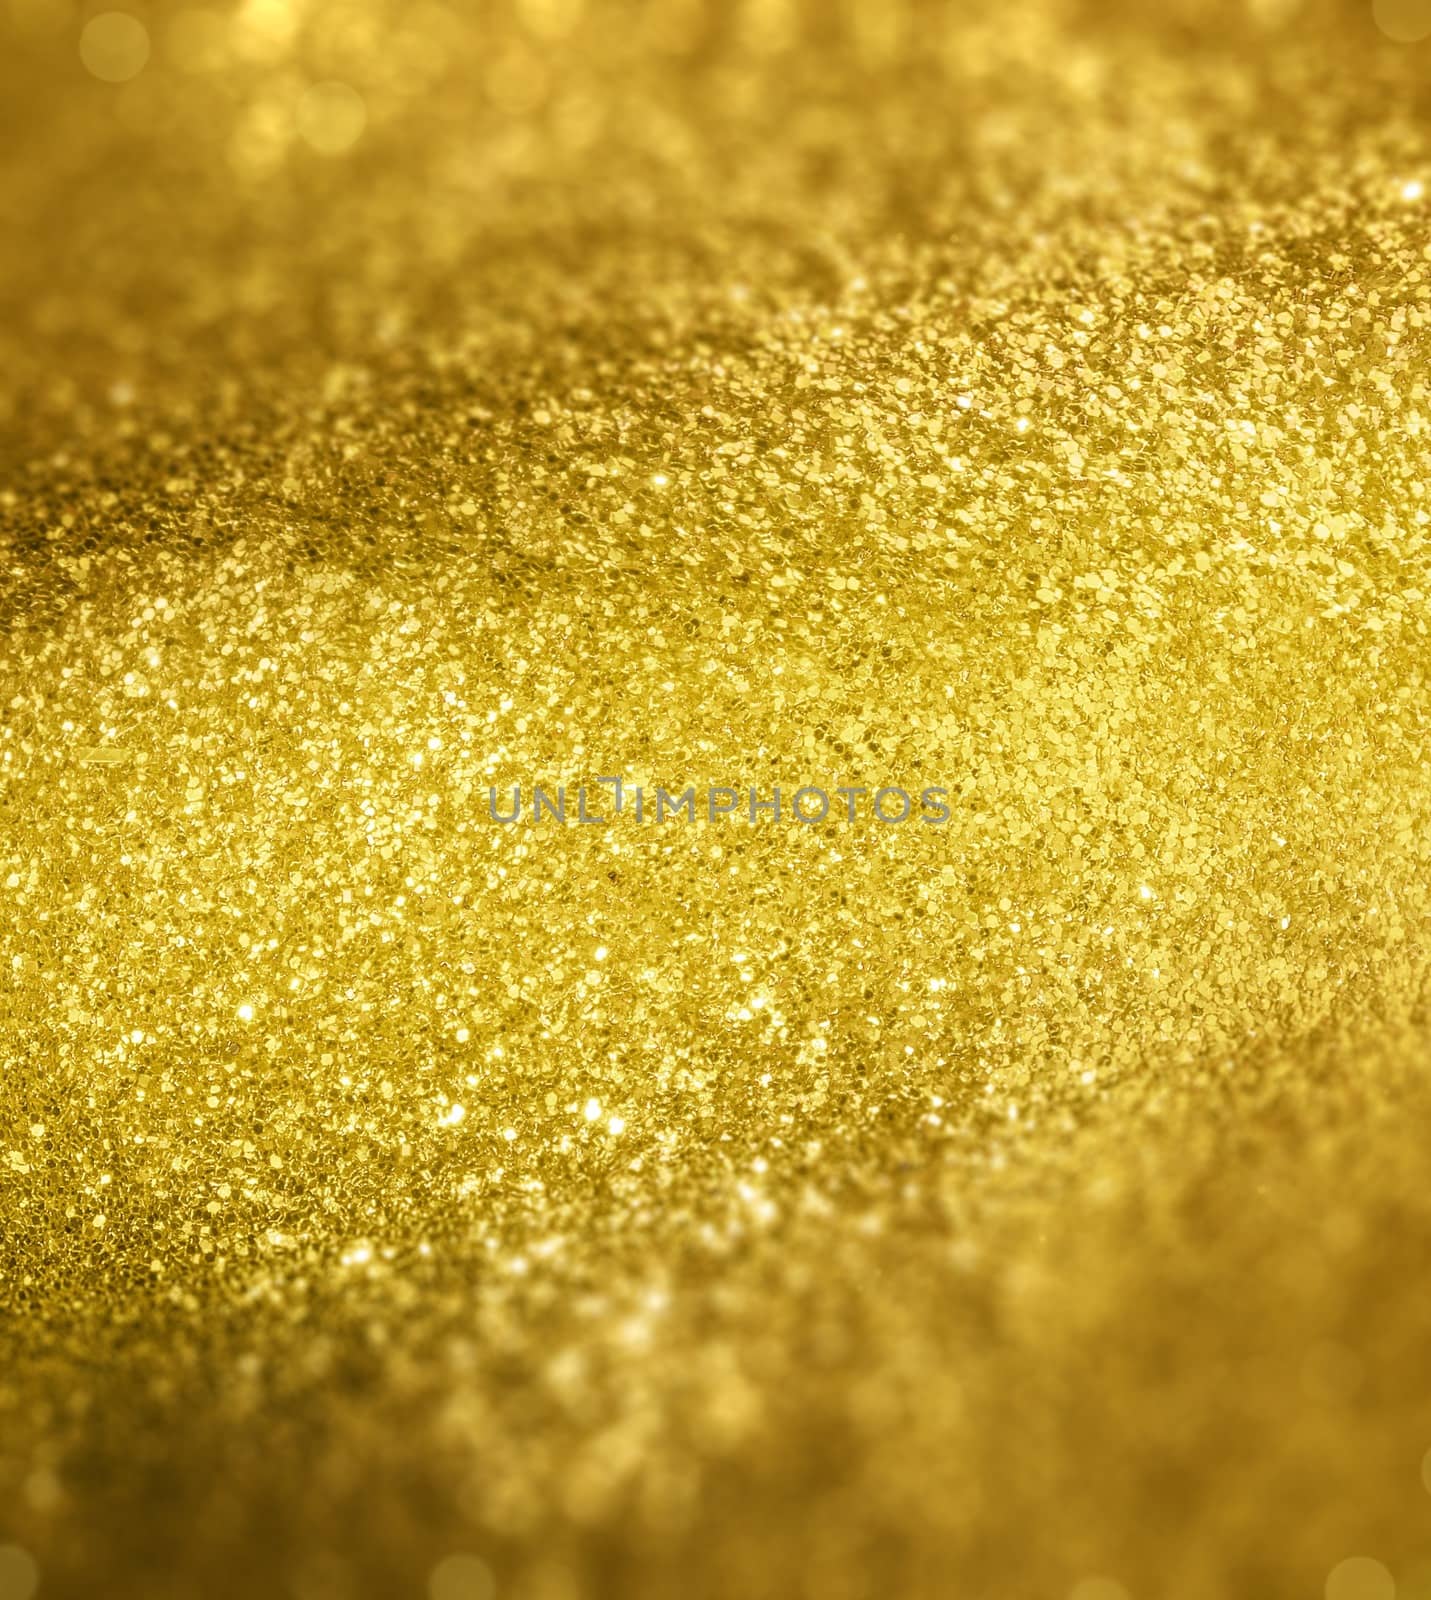 Picture of a golden background with sparkling glitter